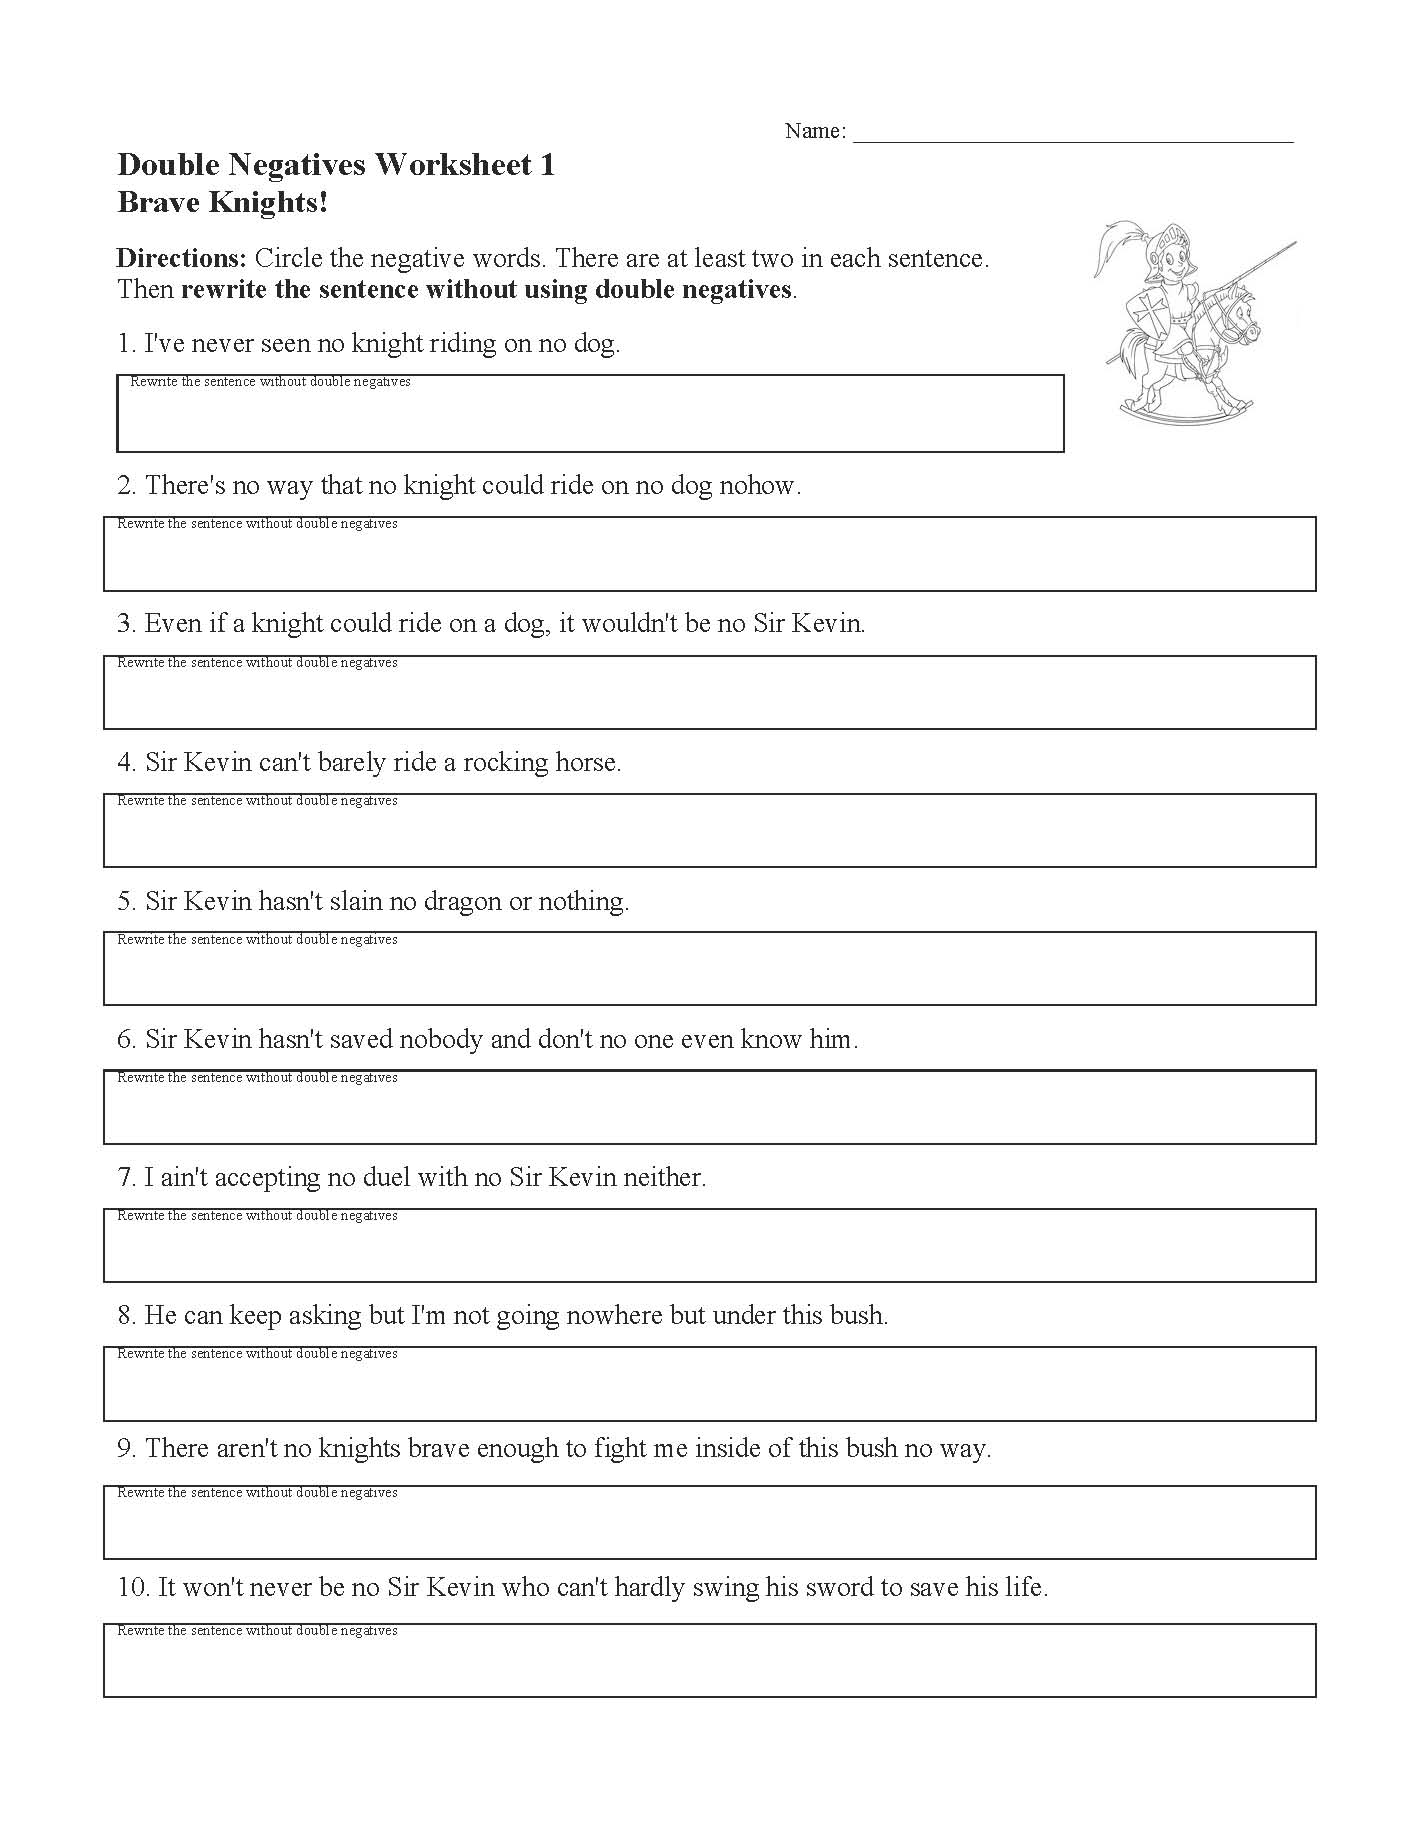 Double Negative Sentences Worksheets With Answers